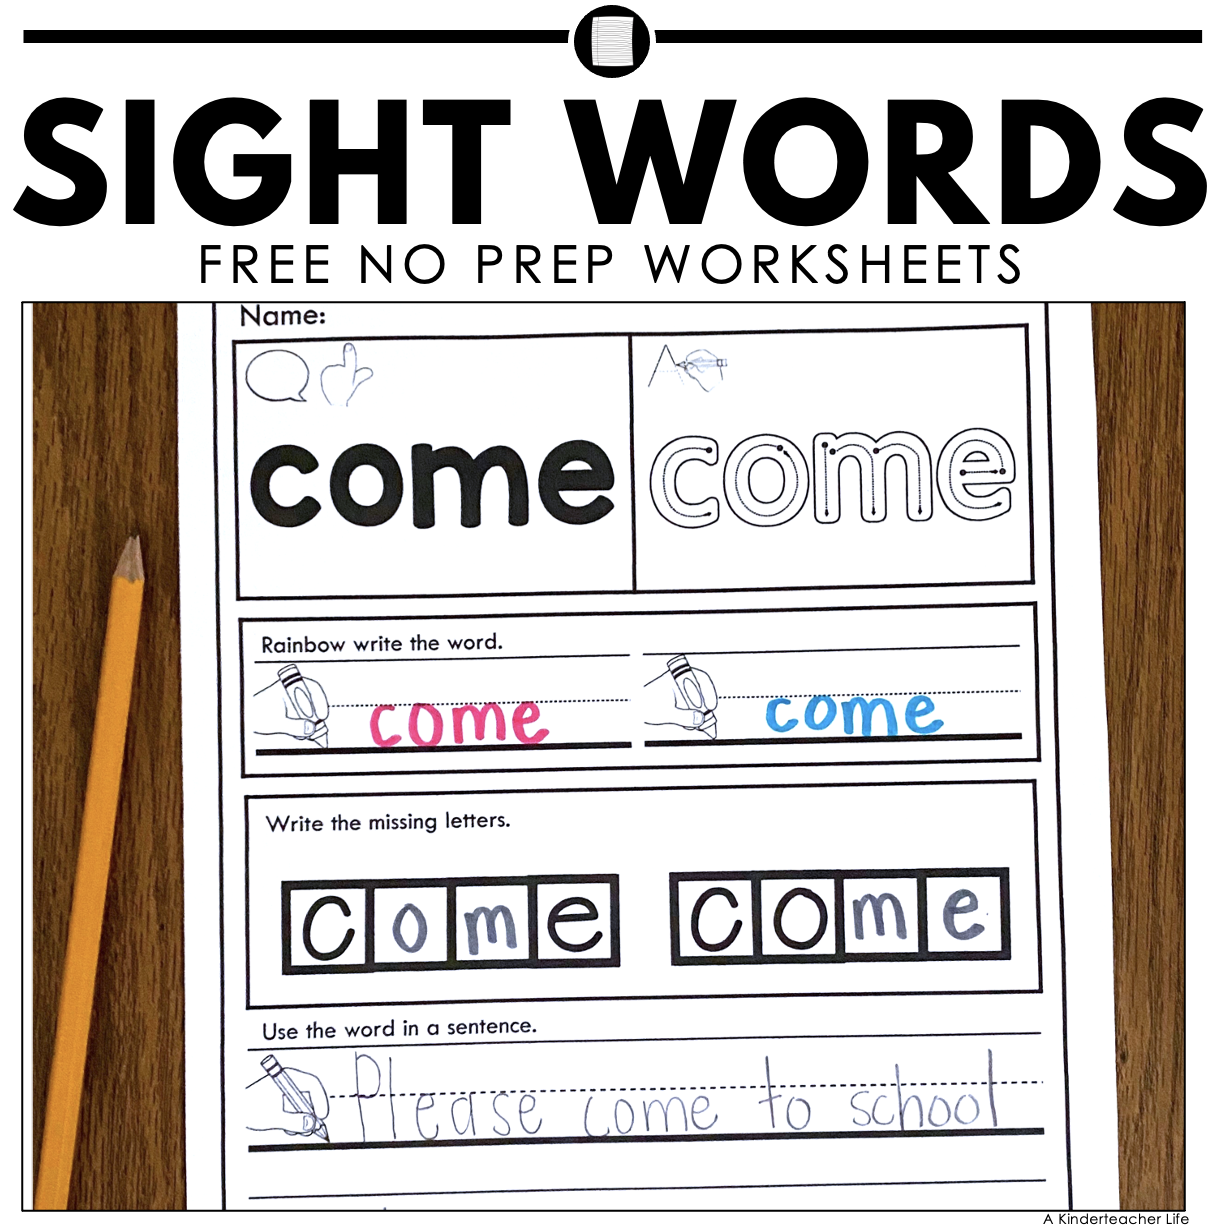 How to Introduce Sight Words